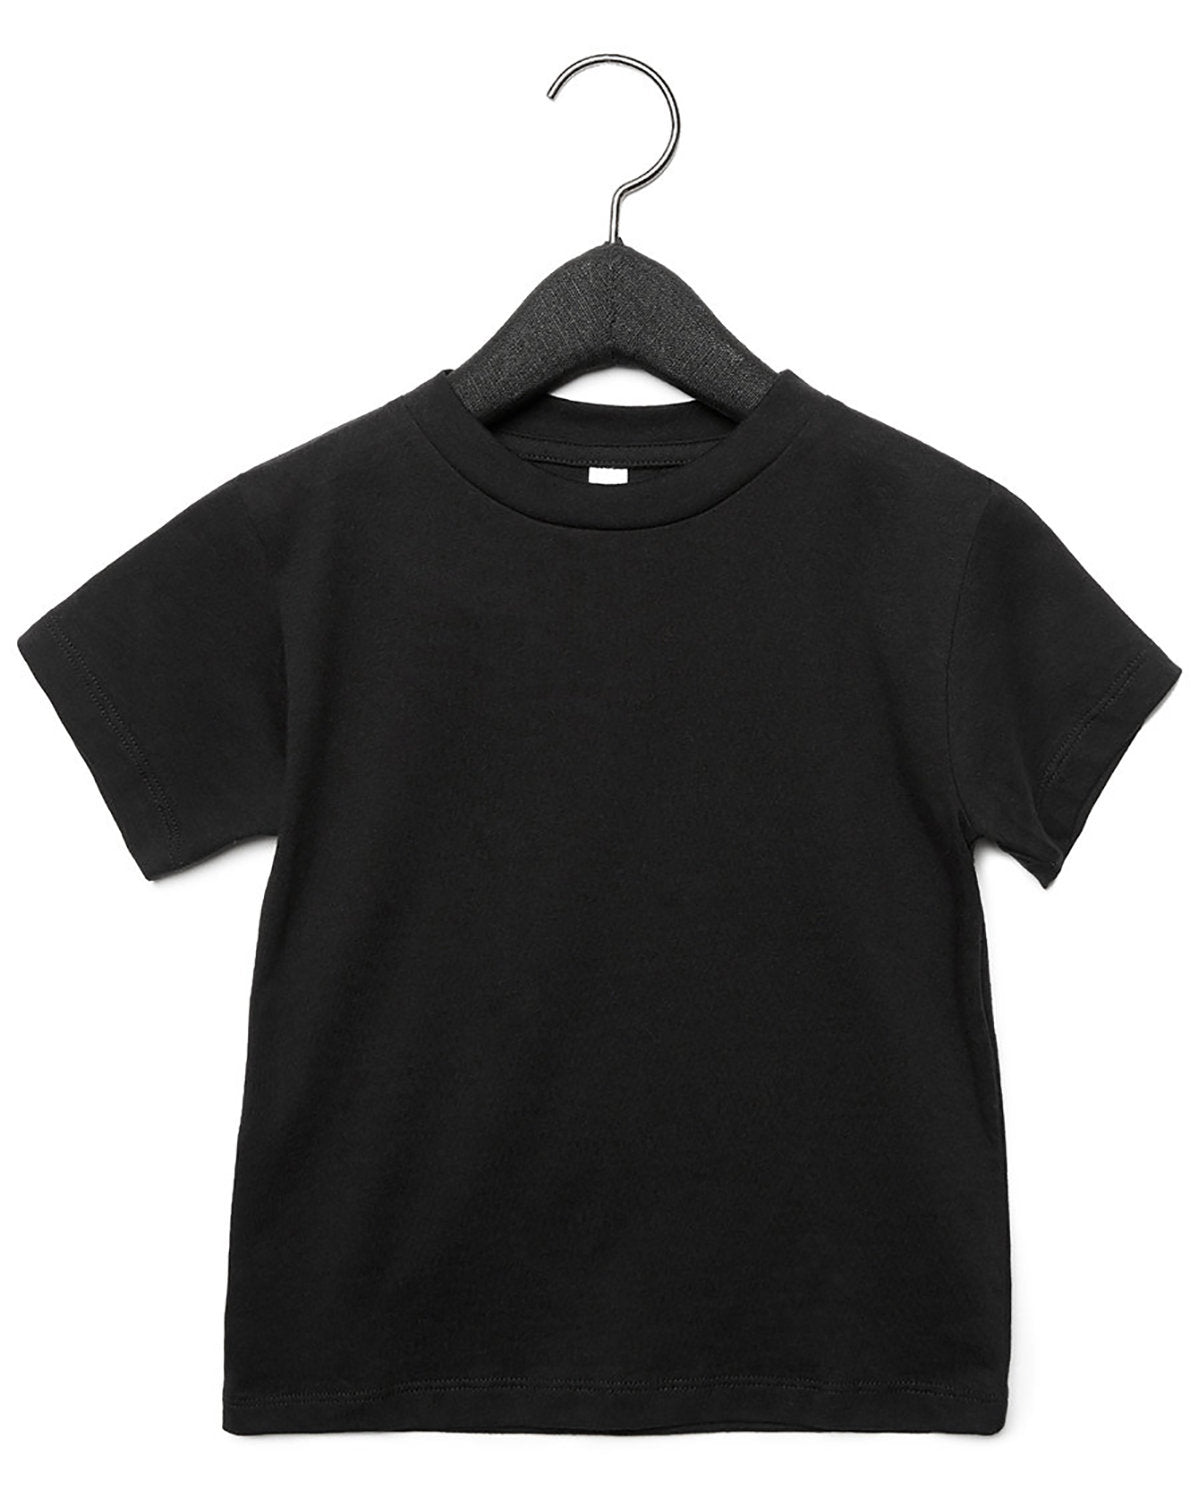 Plain T-Shirt for Toddlers - BLANK